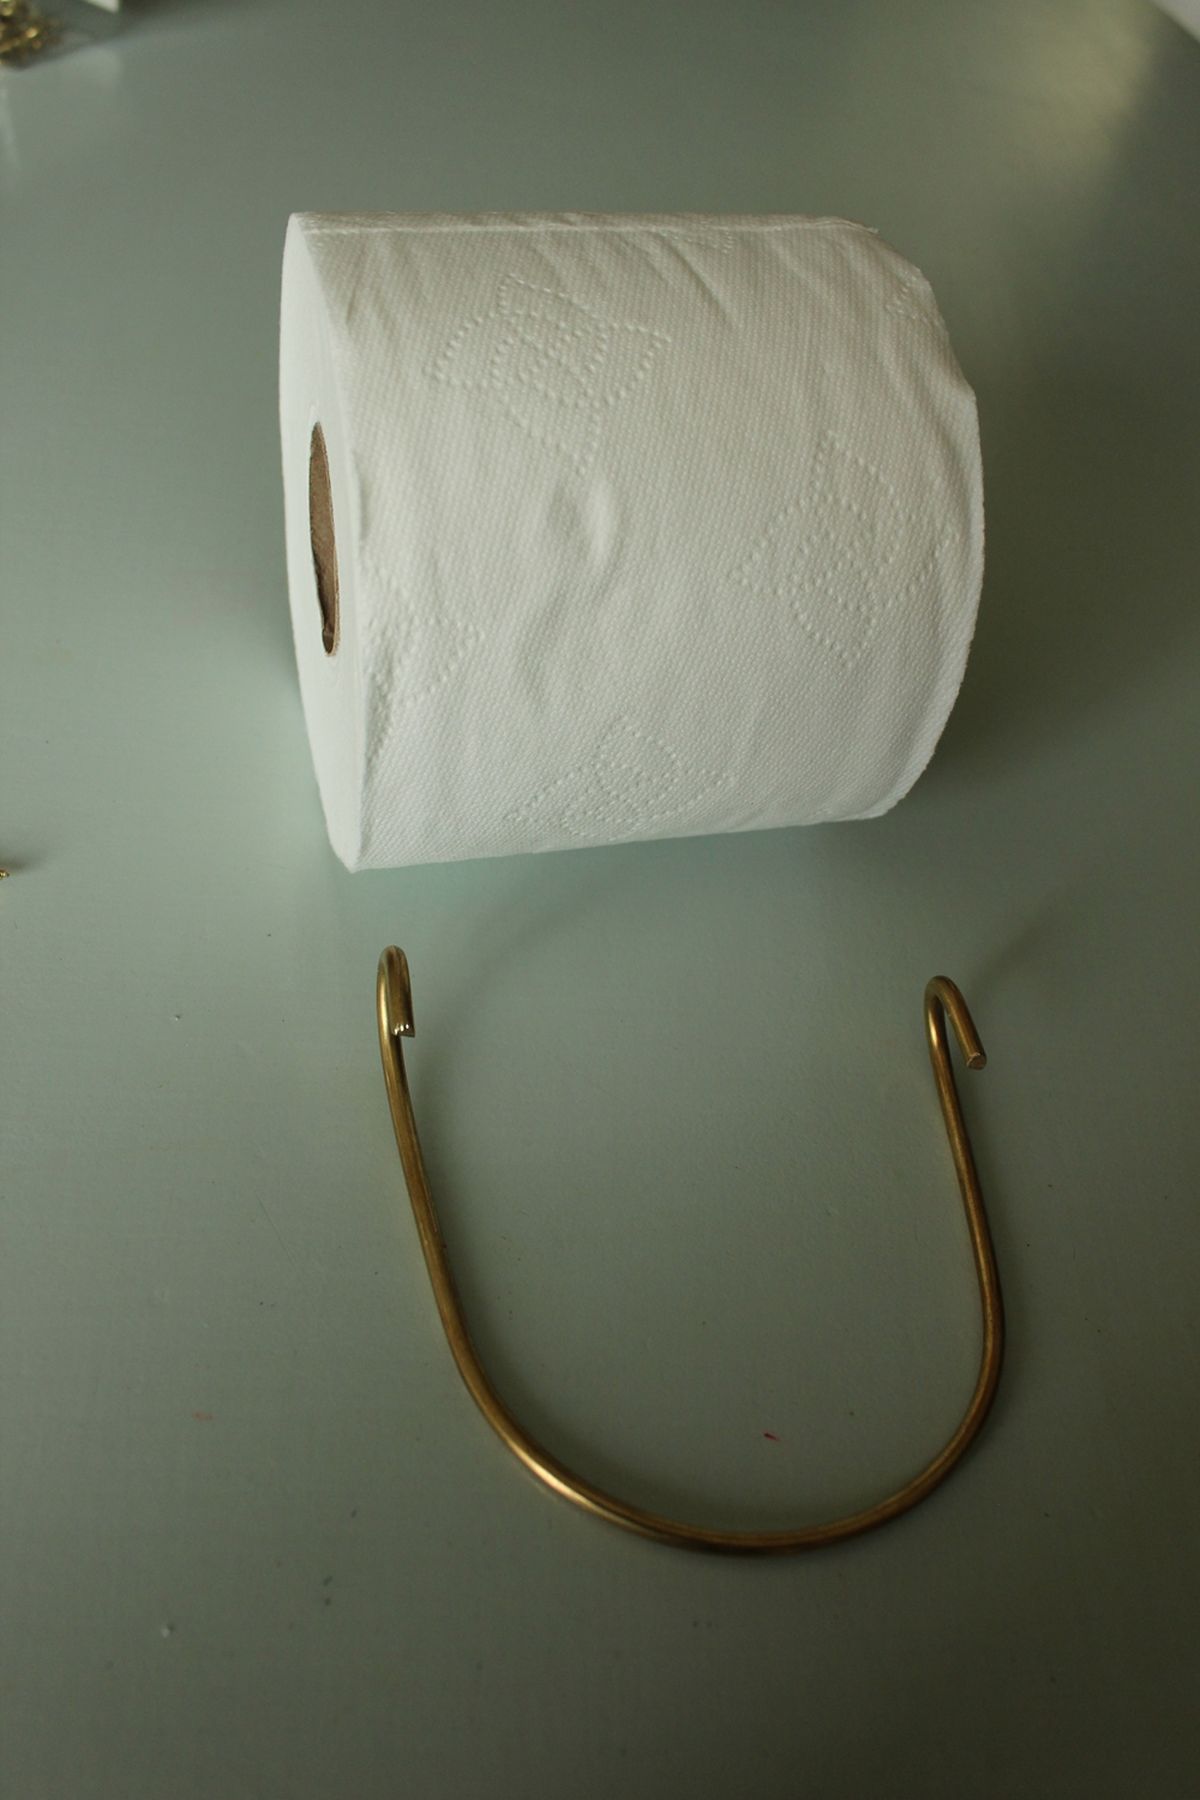 Grab a roll toilet paper